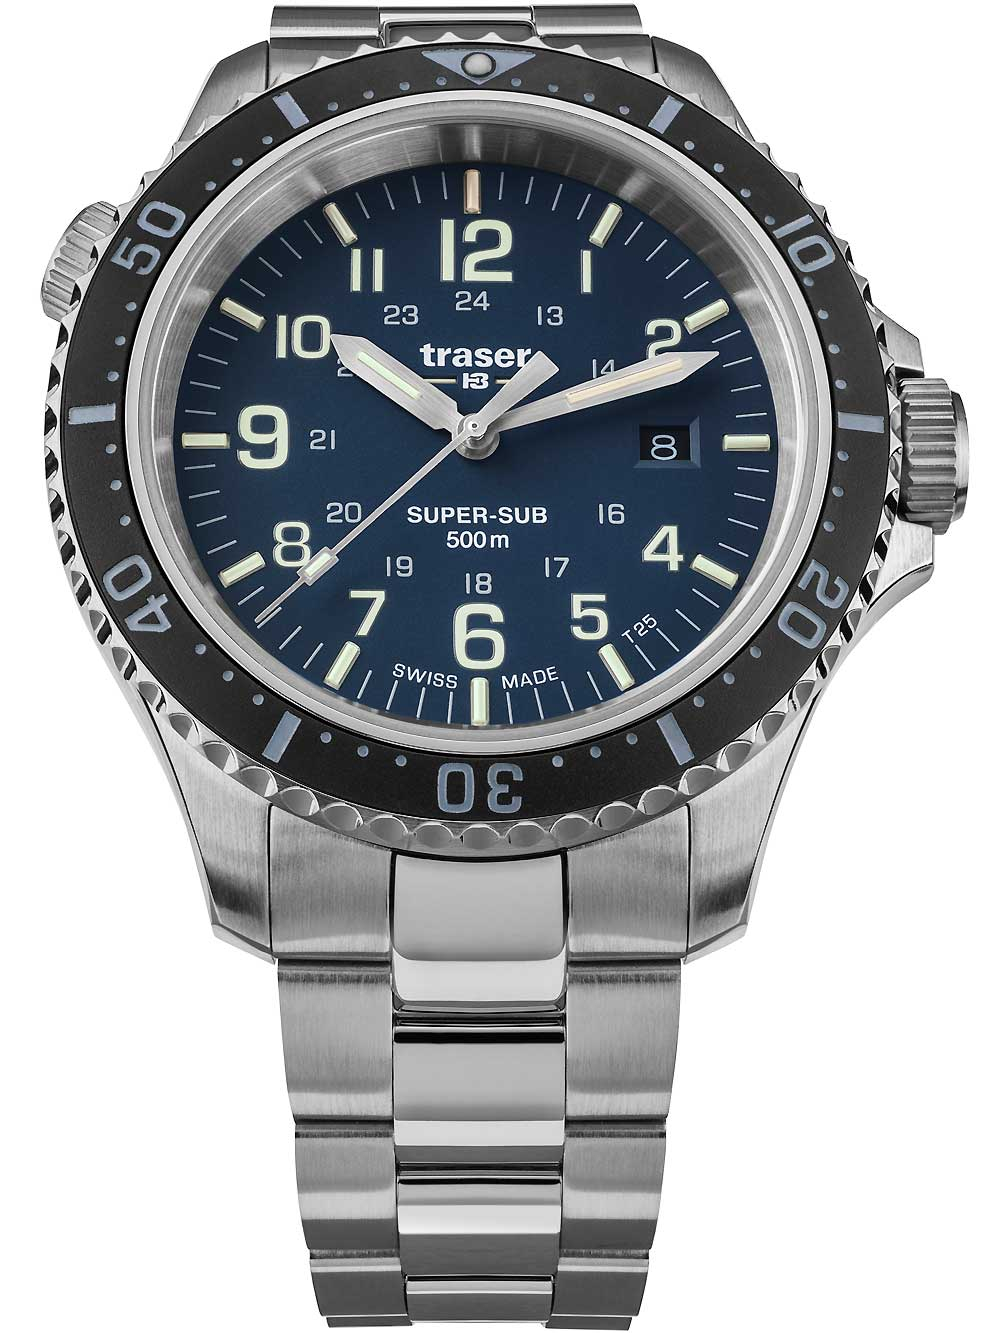 Traser H3 109375 P67 T25 SuperSub blue 46 mm diver 50ATM BY Traser H3 - Wristwatch available at DOYUF